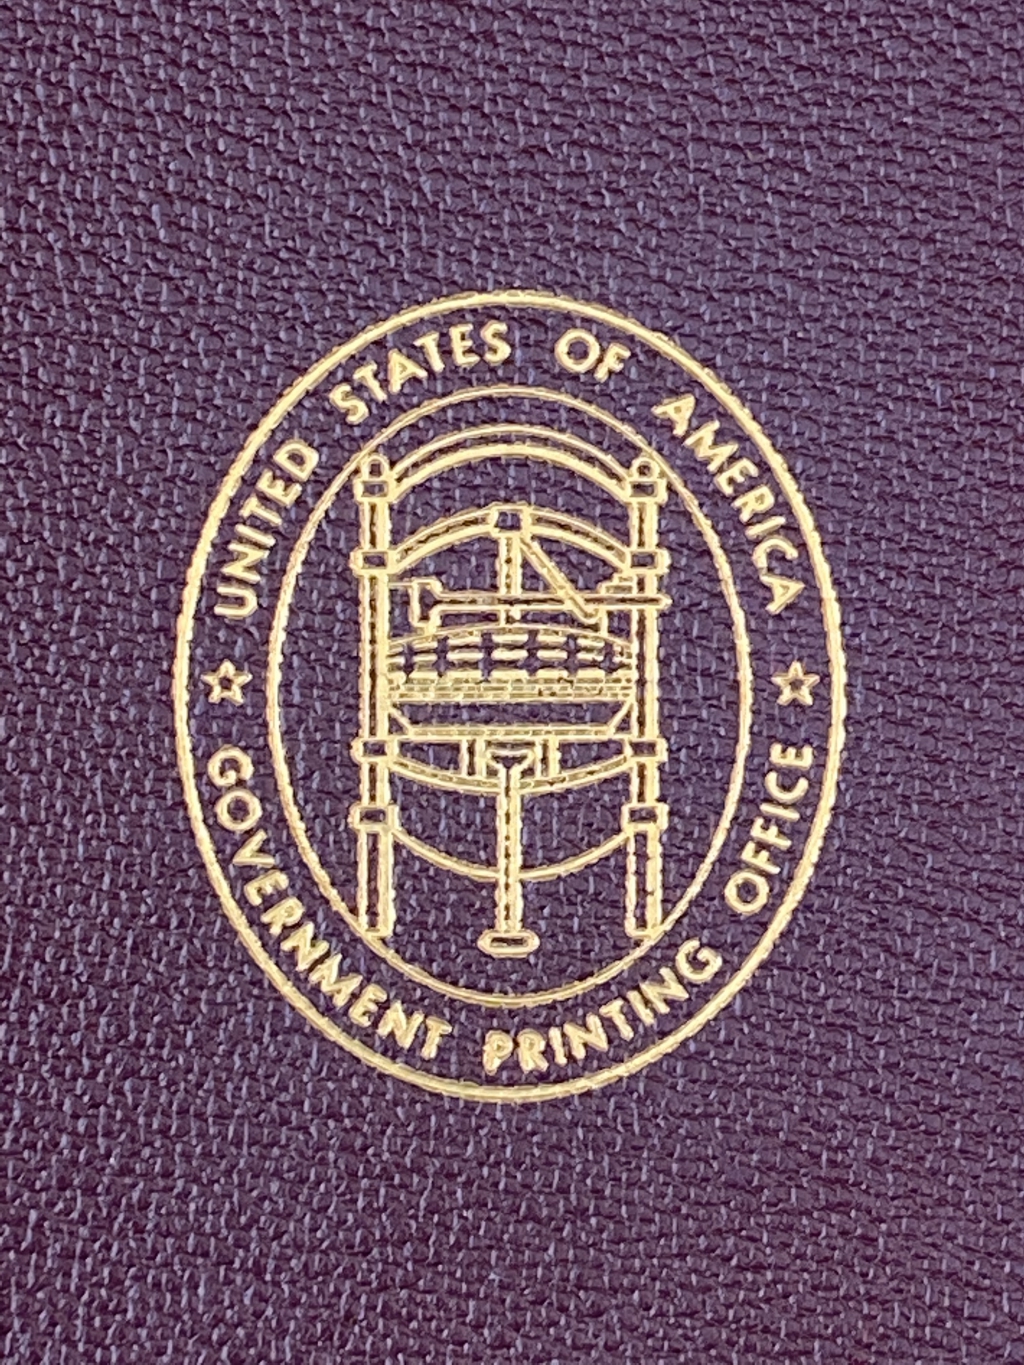 Enlargement of the GPO seal stamped into the upper covers of each of the five volumes.